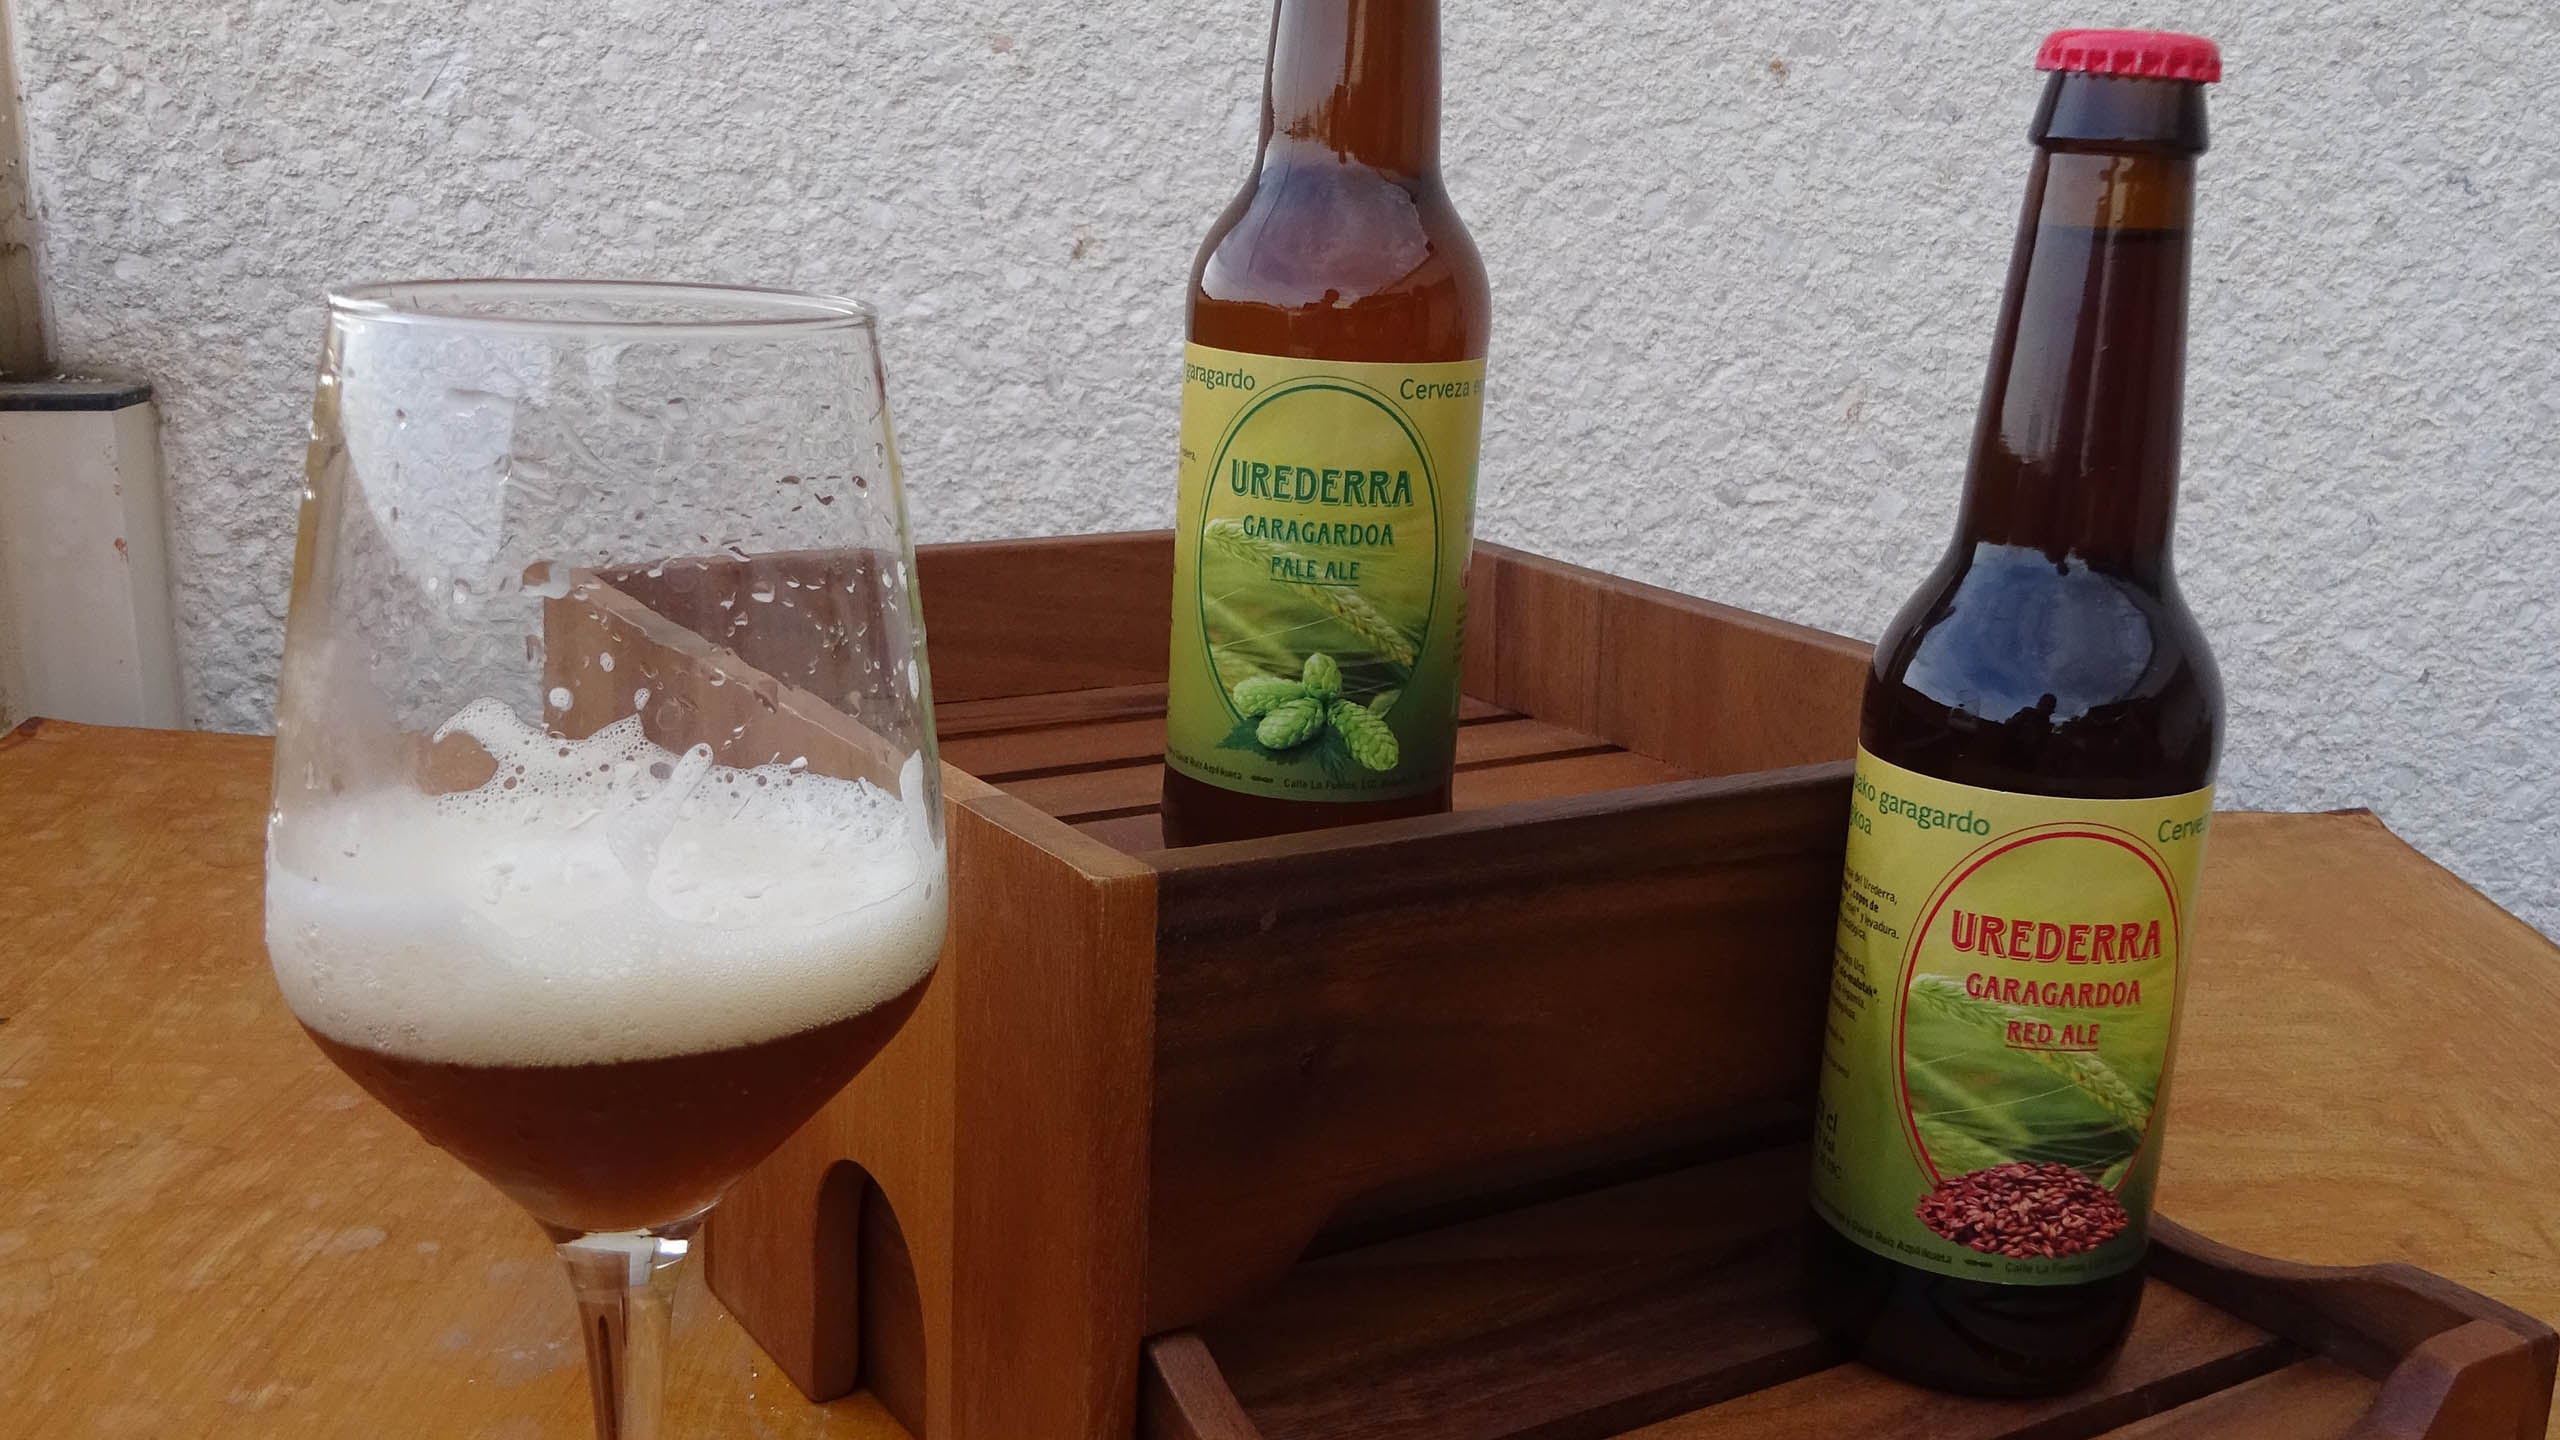 Come and taste the beer made at the Urederra micro-brewery